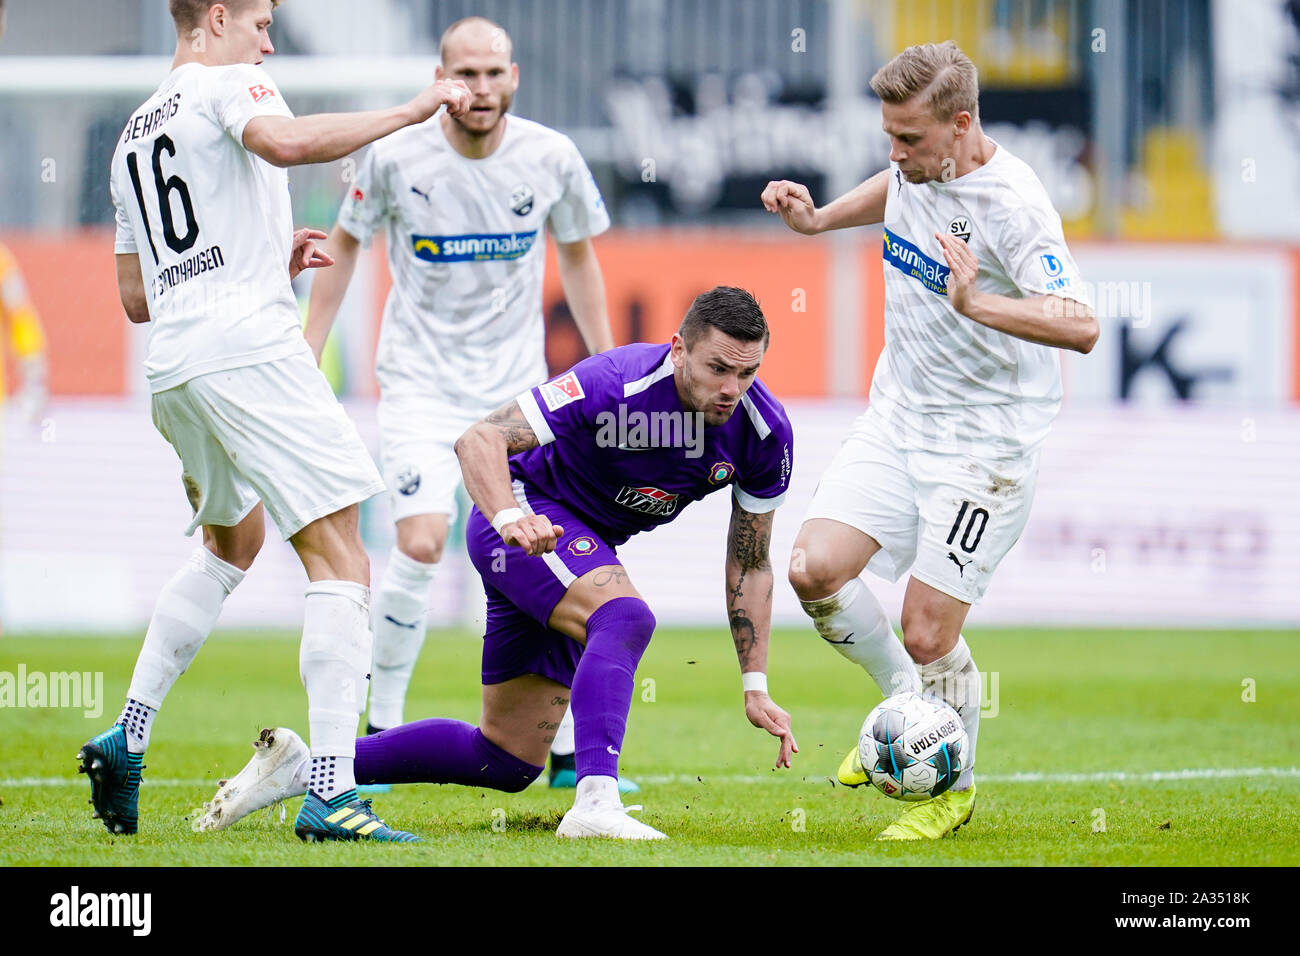 05 October 2019, Baden-Wuerttemberg, Sandhausen: Soccer: 2nd Bundesliga, SV Sandhausen - Erzgebirge Aue, 9th matchday, in Hardtwaldstadion. Sandhausens Kevin Behrens (l-r), Pascal Testroet from Erzgebirge Aue and Sandhausens Julius Biada fight for the ball. In the background is Gerrit Nauber con Sandhausen. Photo: Uwe Anspach/dpa - IMPORTANT NOTE: In accordance with the requirements of the DFL Deutsche Fußball Liga or the DFB Deutscher Fußball-Bund, it is prohibited to use or have used photographs taken in the stadium and/or the match in the form of sequence images and/or video-like photo sequ Stock Photo